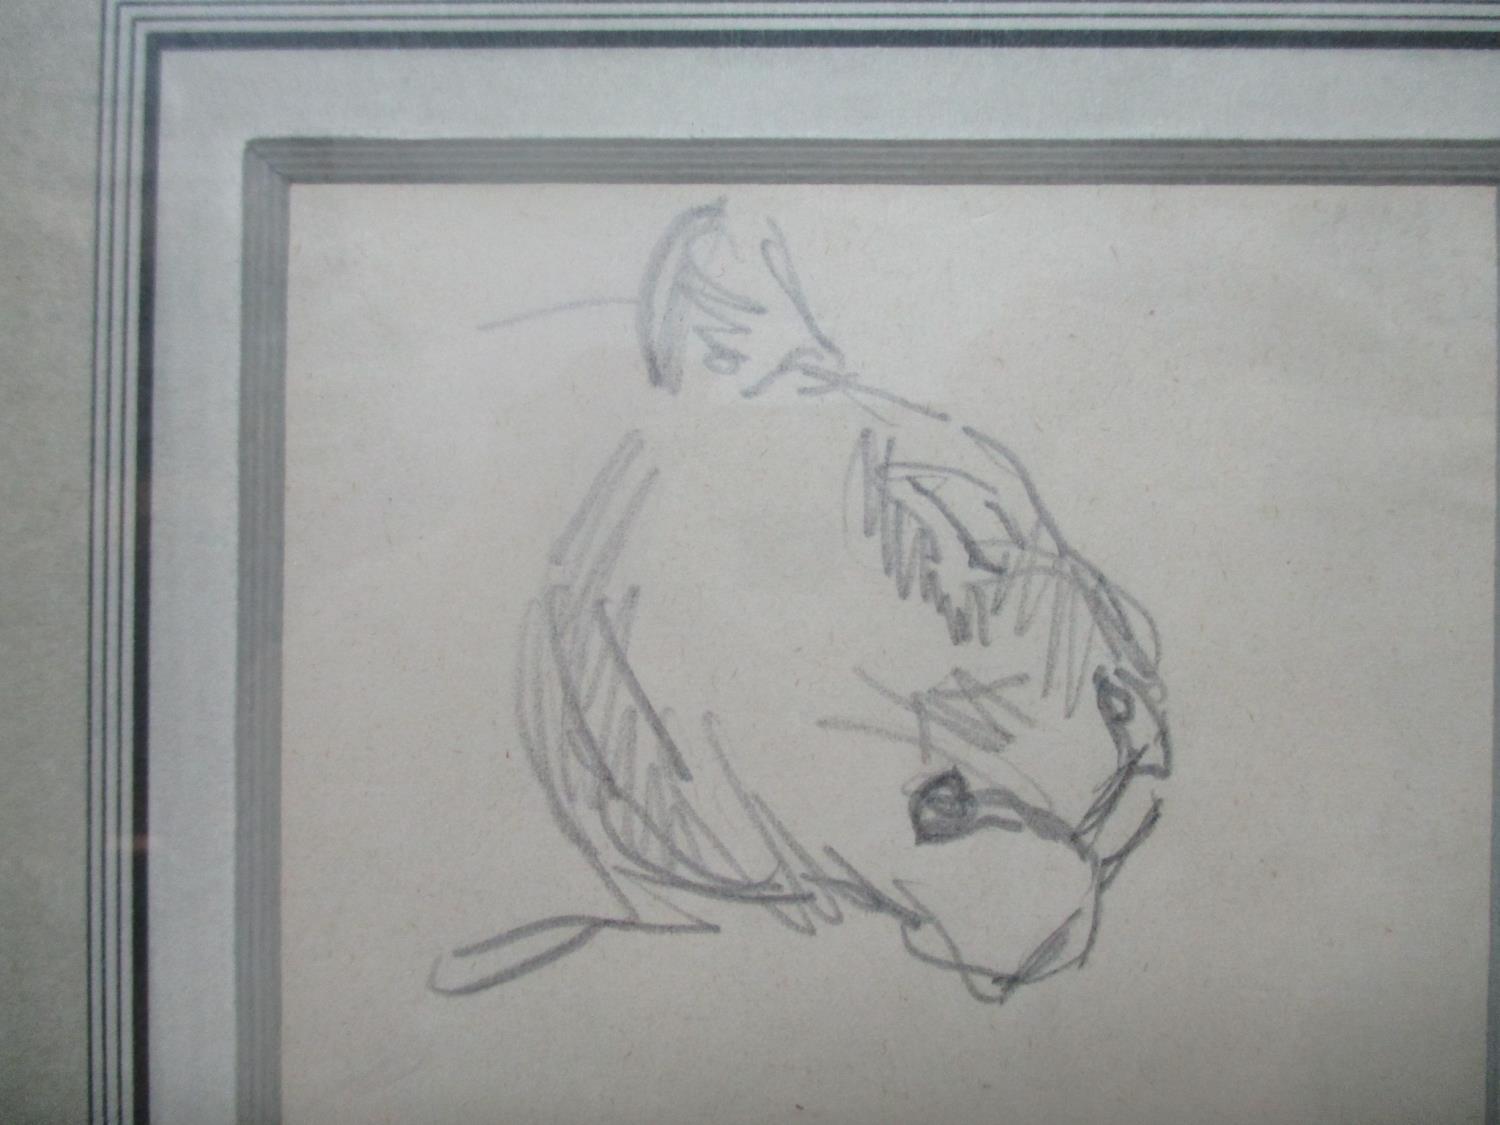 Attributed to Theophile Steinlen 1859-1923 - 'Lioness Head', pencil sketch on paper, 6" x 4", in a - Image 3 of 3